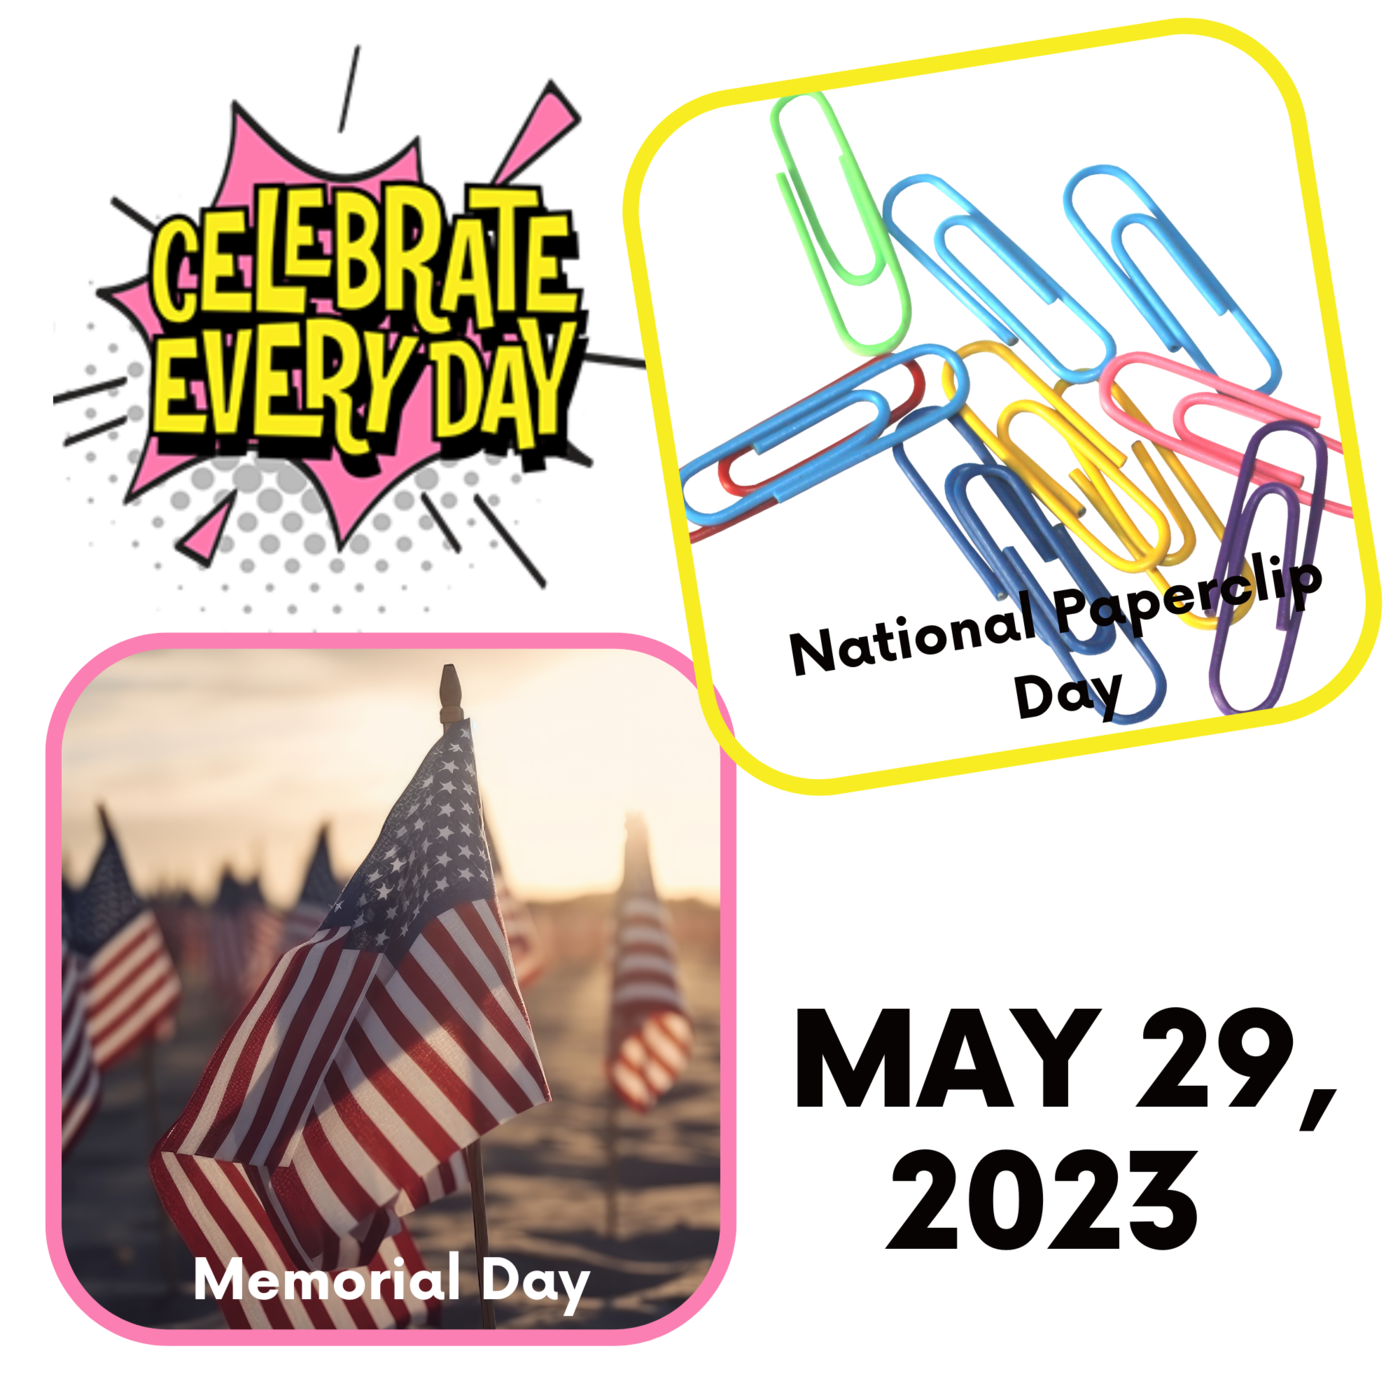 May 29, 2023 - National Paperclip Day | Memorial Day  Image